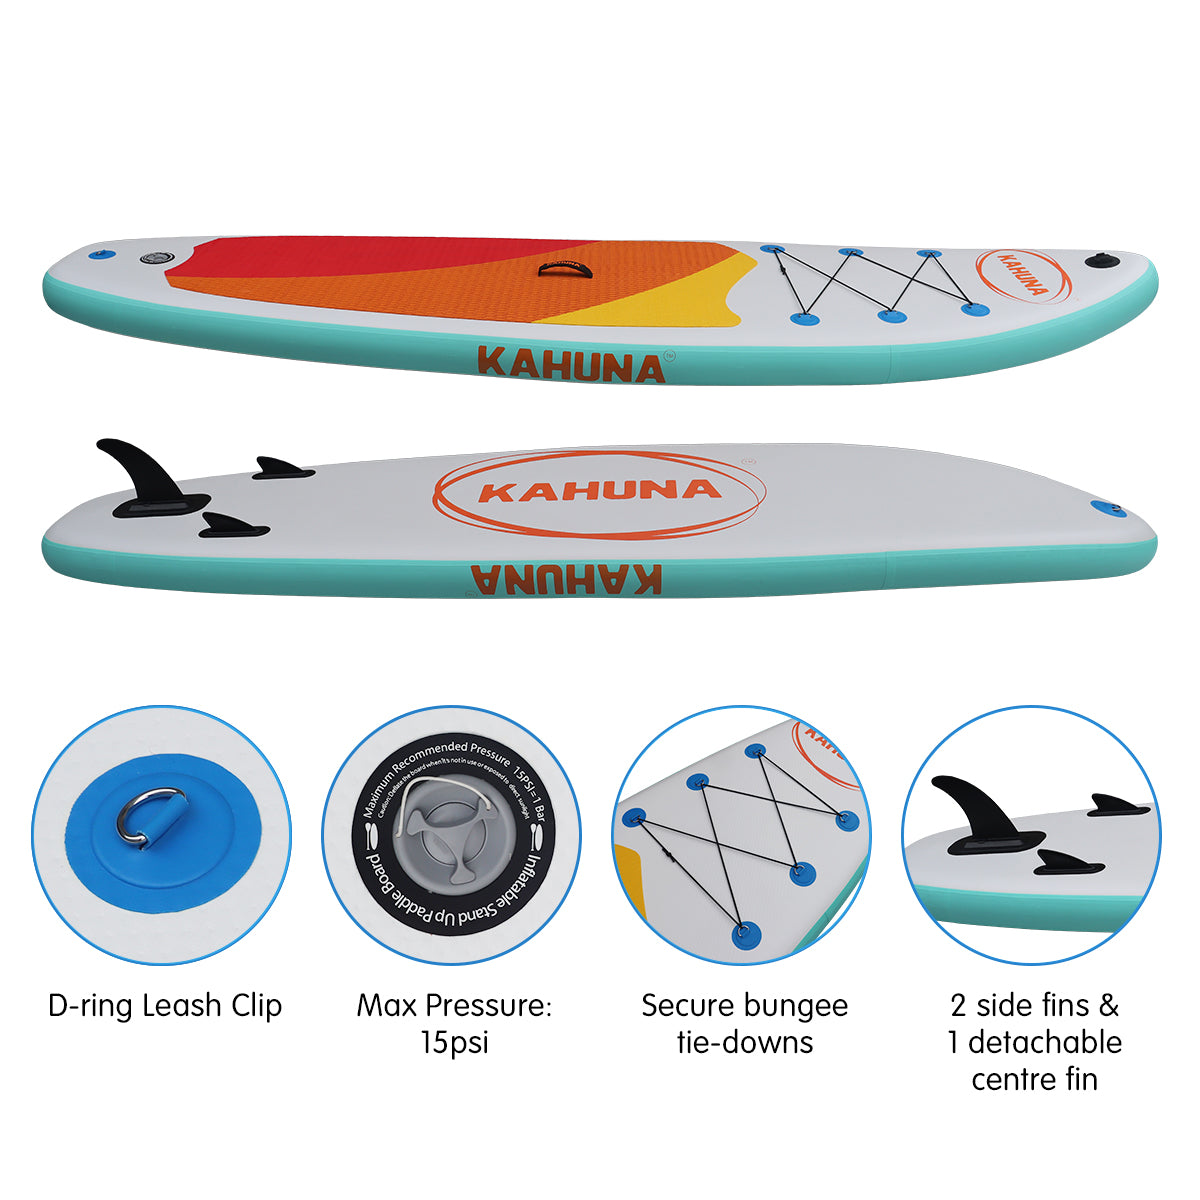 Inflatable Stand Up Paddle Board 11FT SUP Paddleboard for Water Adventures